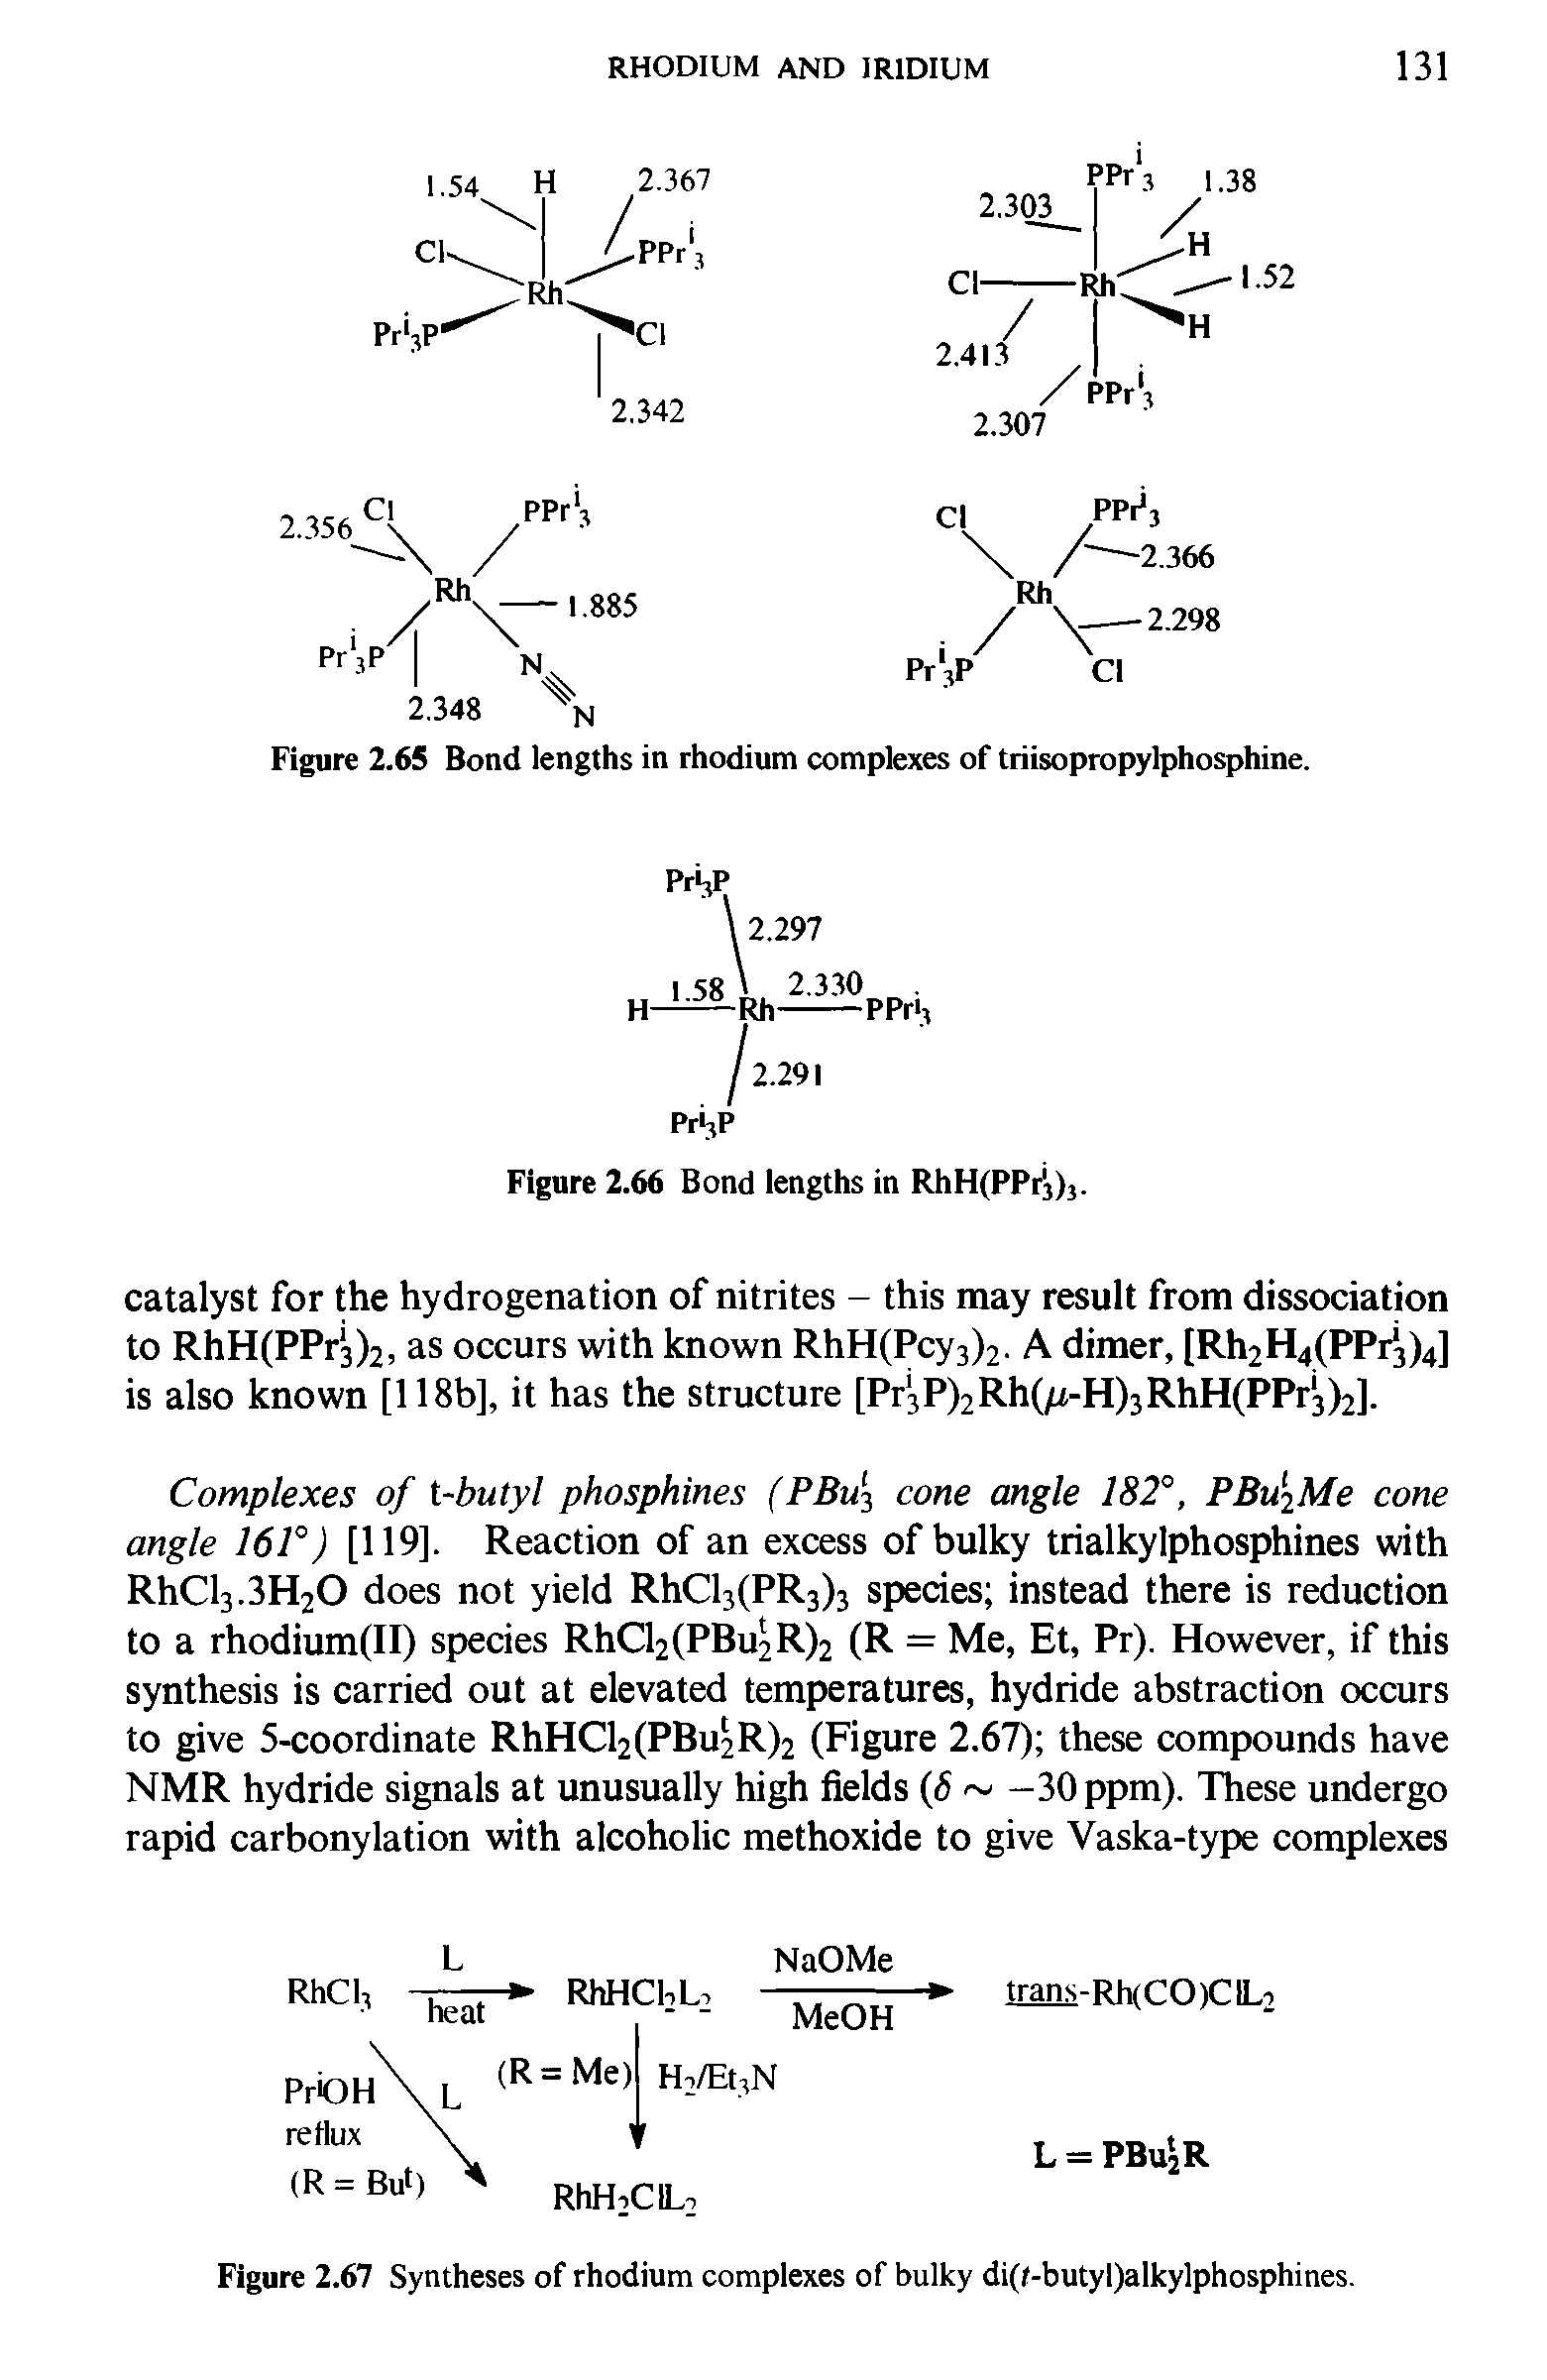 Figure 2.67 Syntheses of rhodium complexes of bulky di(f-butyl)alkylphosphines.